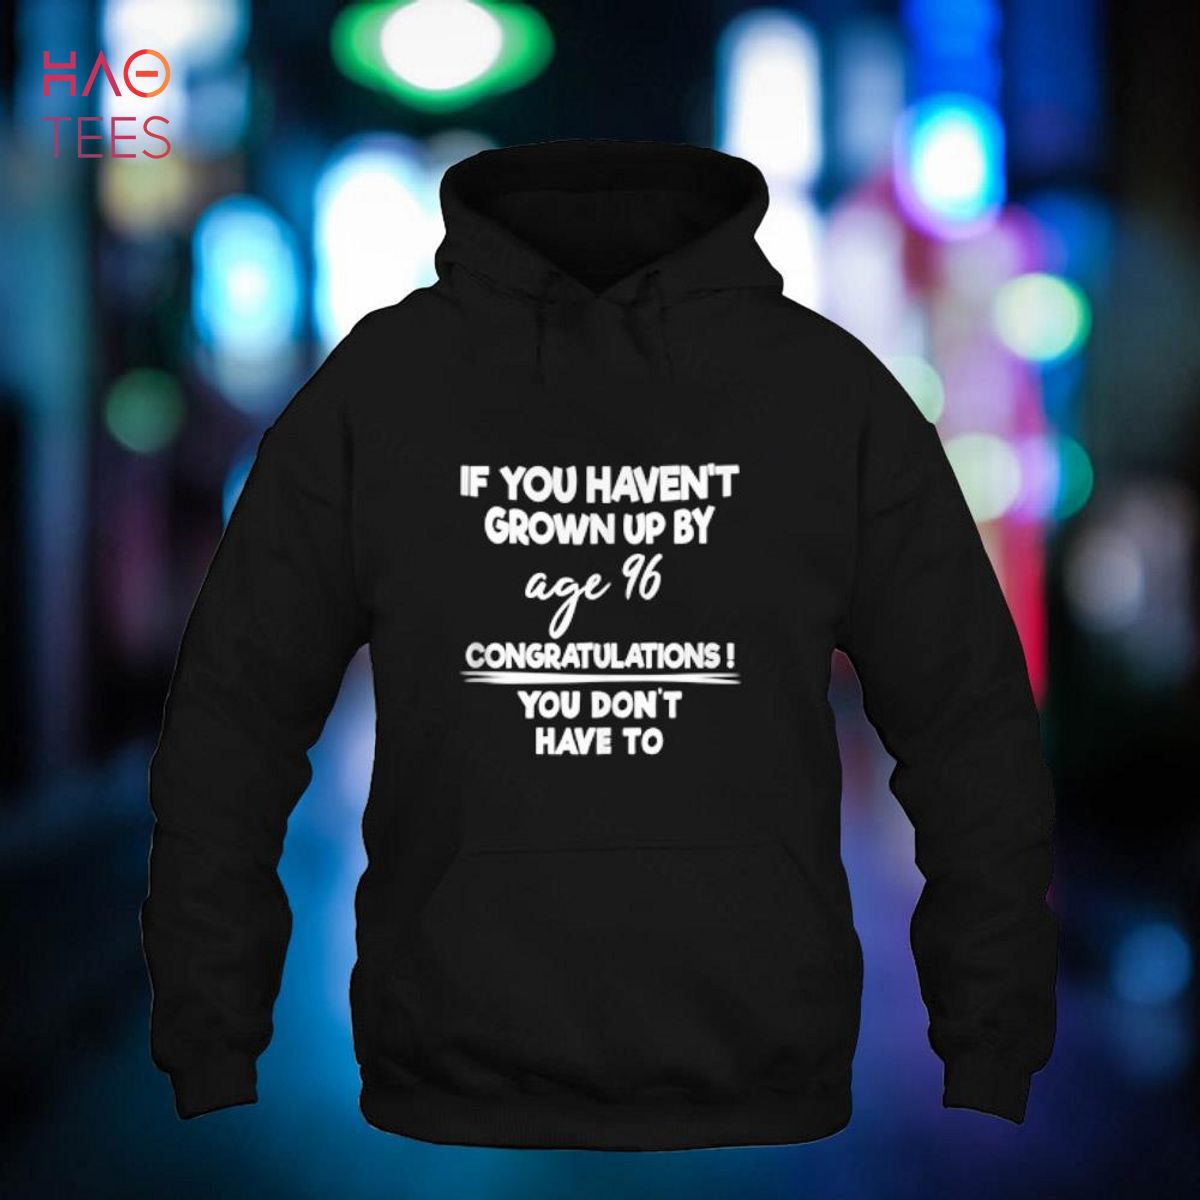 If You Haven't Grown Up By Age 96 You Don't Have To Apparel Shirt